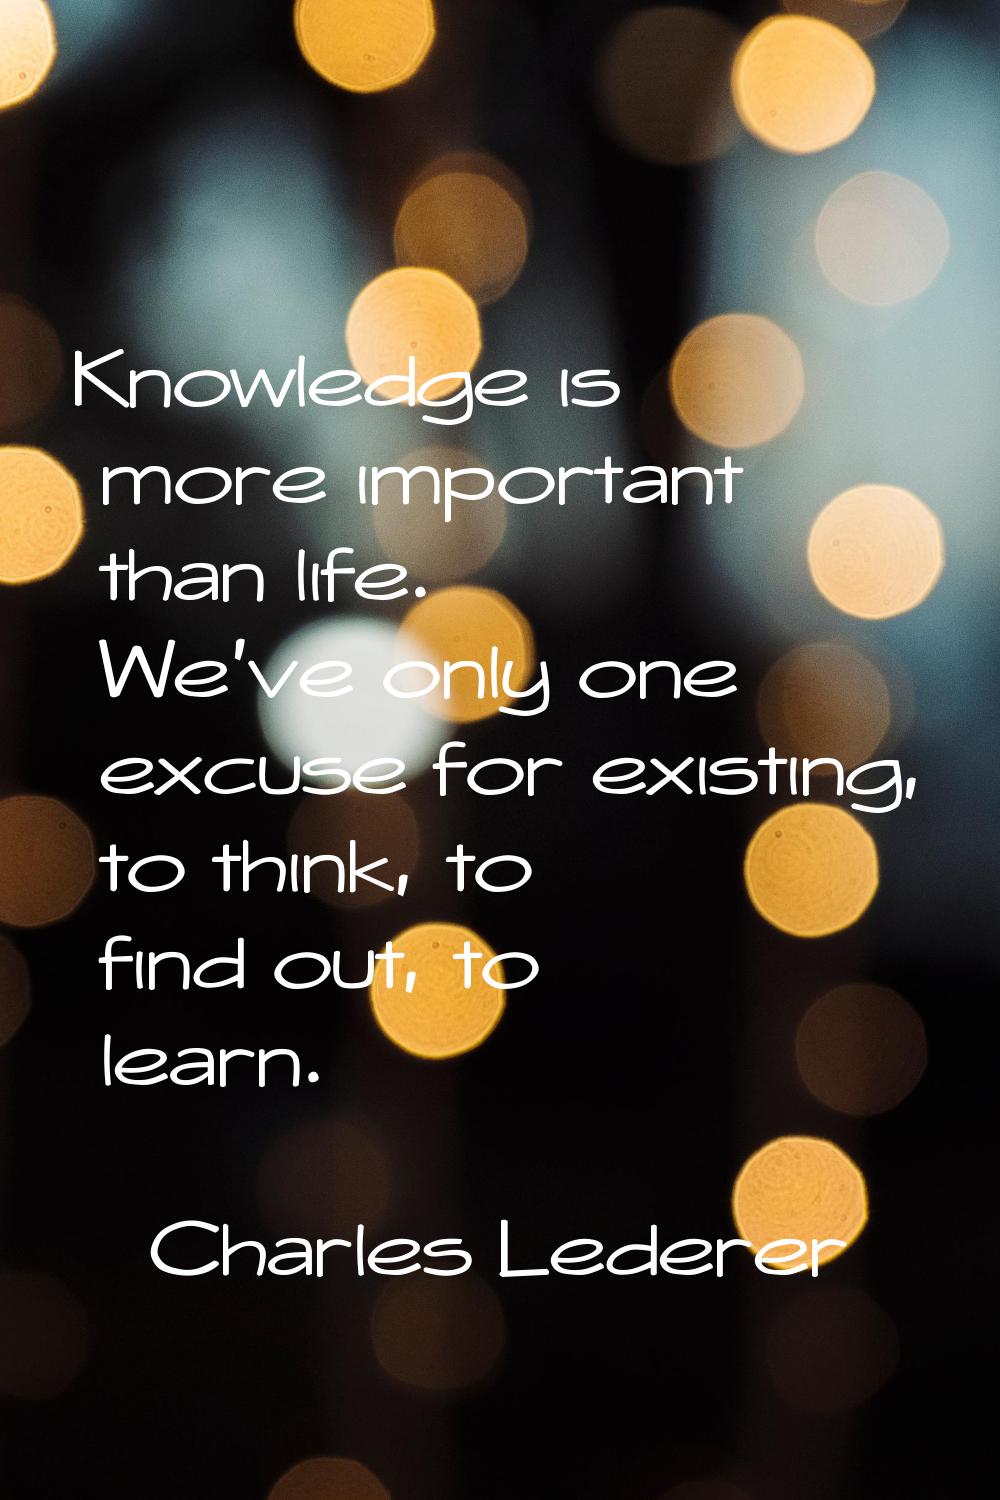 Knowledge is more important than life. We've only one excuse for existing, to think, to find out, t